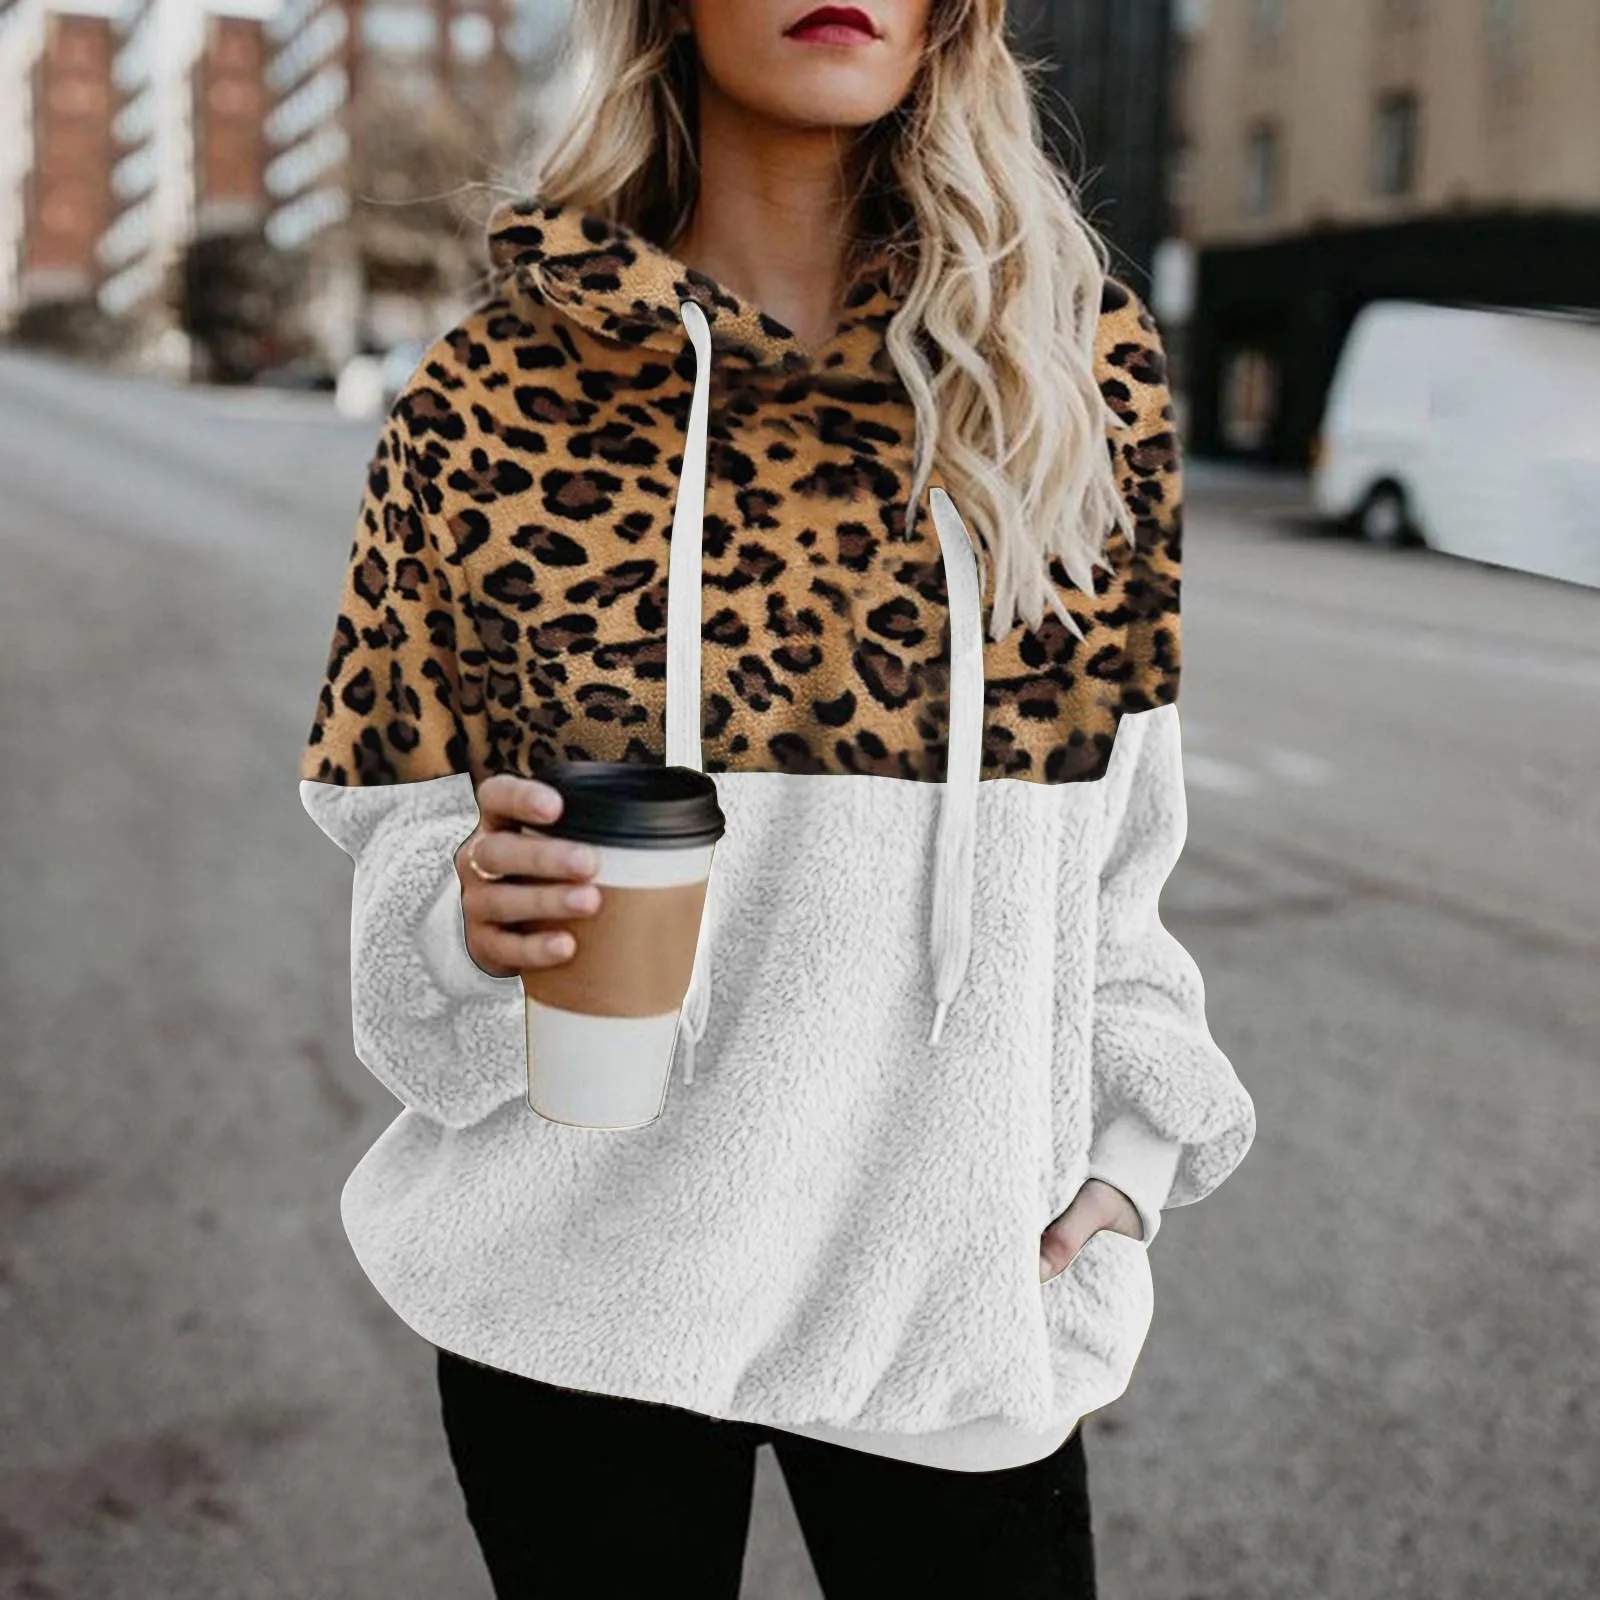 HOOUDO Sweatshirts Womens,Autumn Winter Sale Casual Patchwork Leopard Print Round Neck Hoodie Jumper Pullover Tops Blouse 